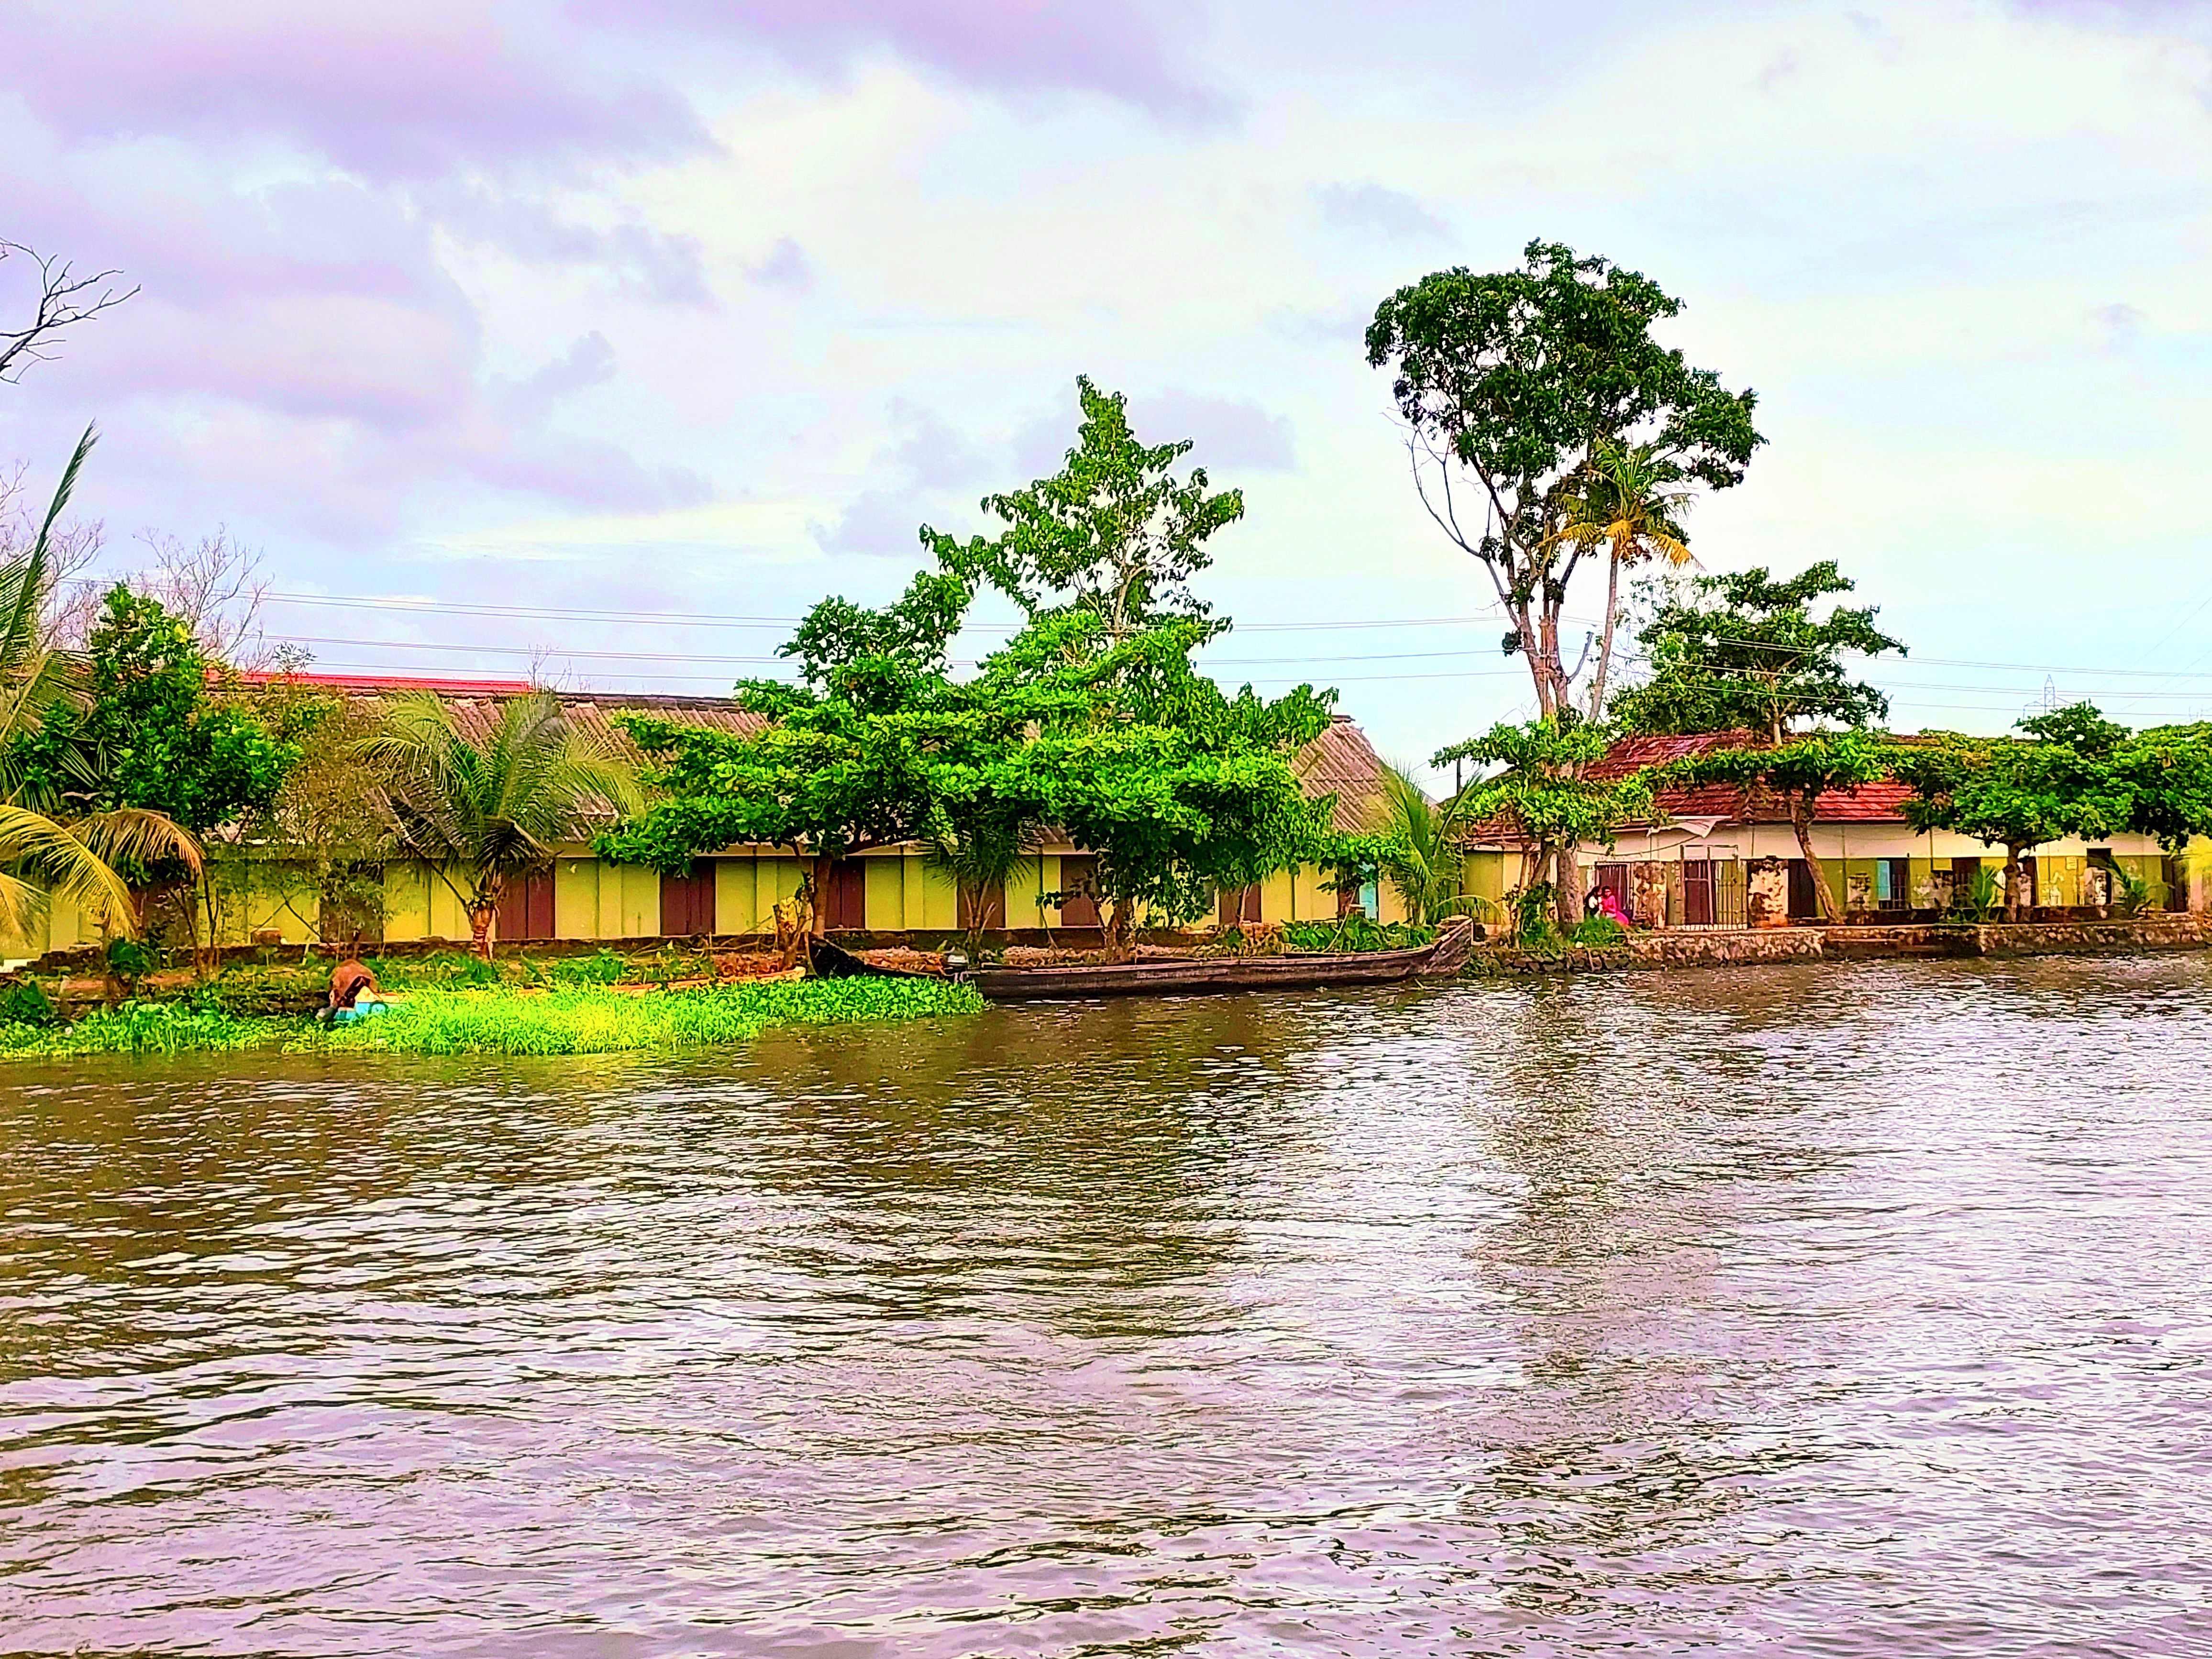 A school situated in the midst of the Alappuzha backwaters Photo Credit: AWO Staff